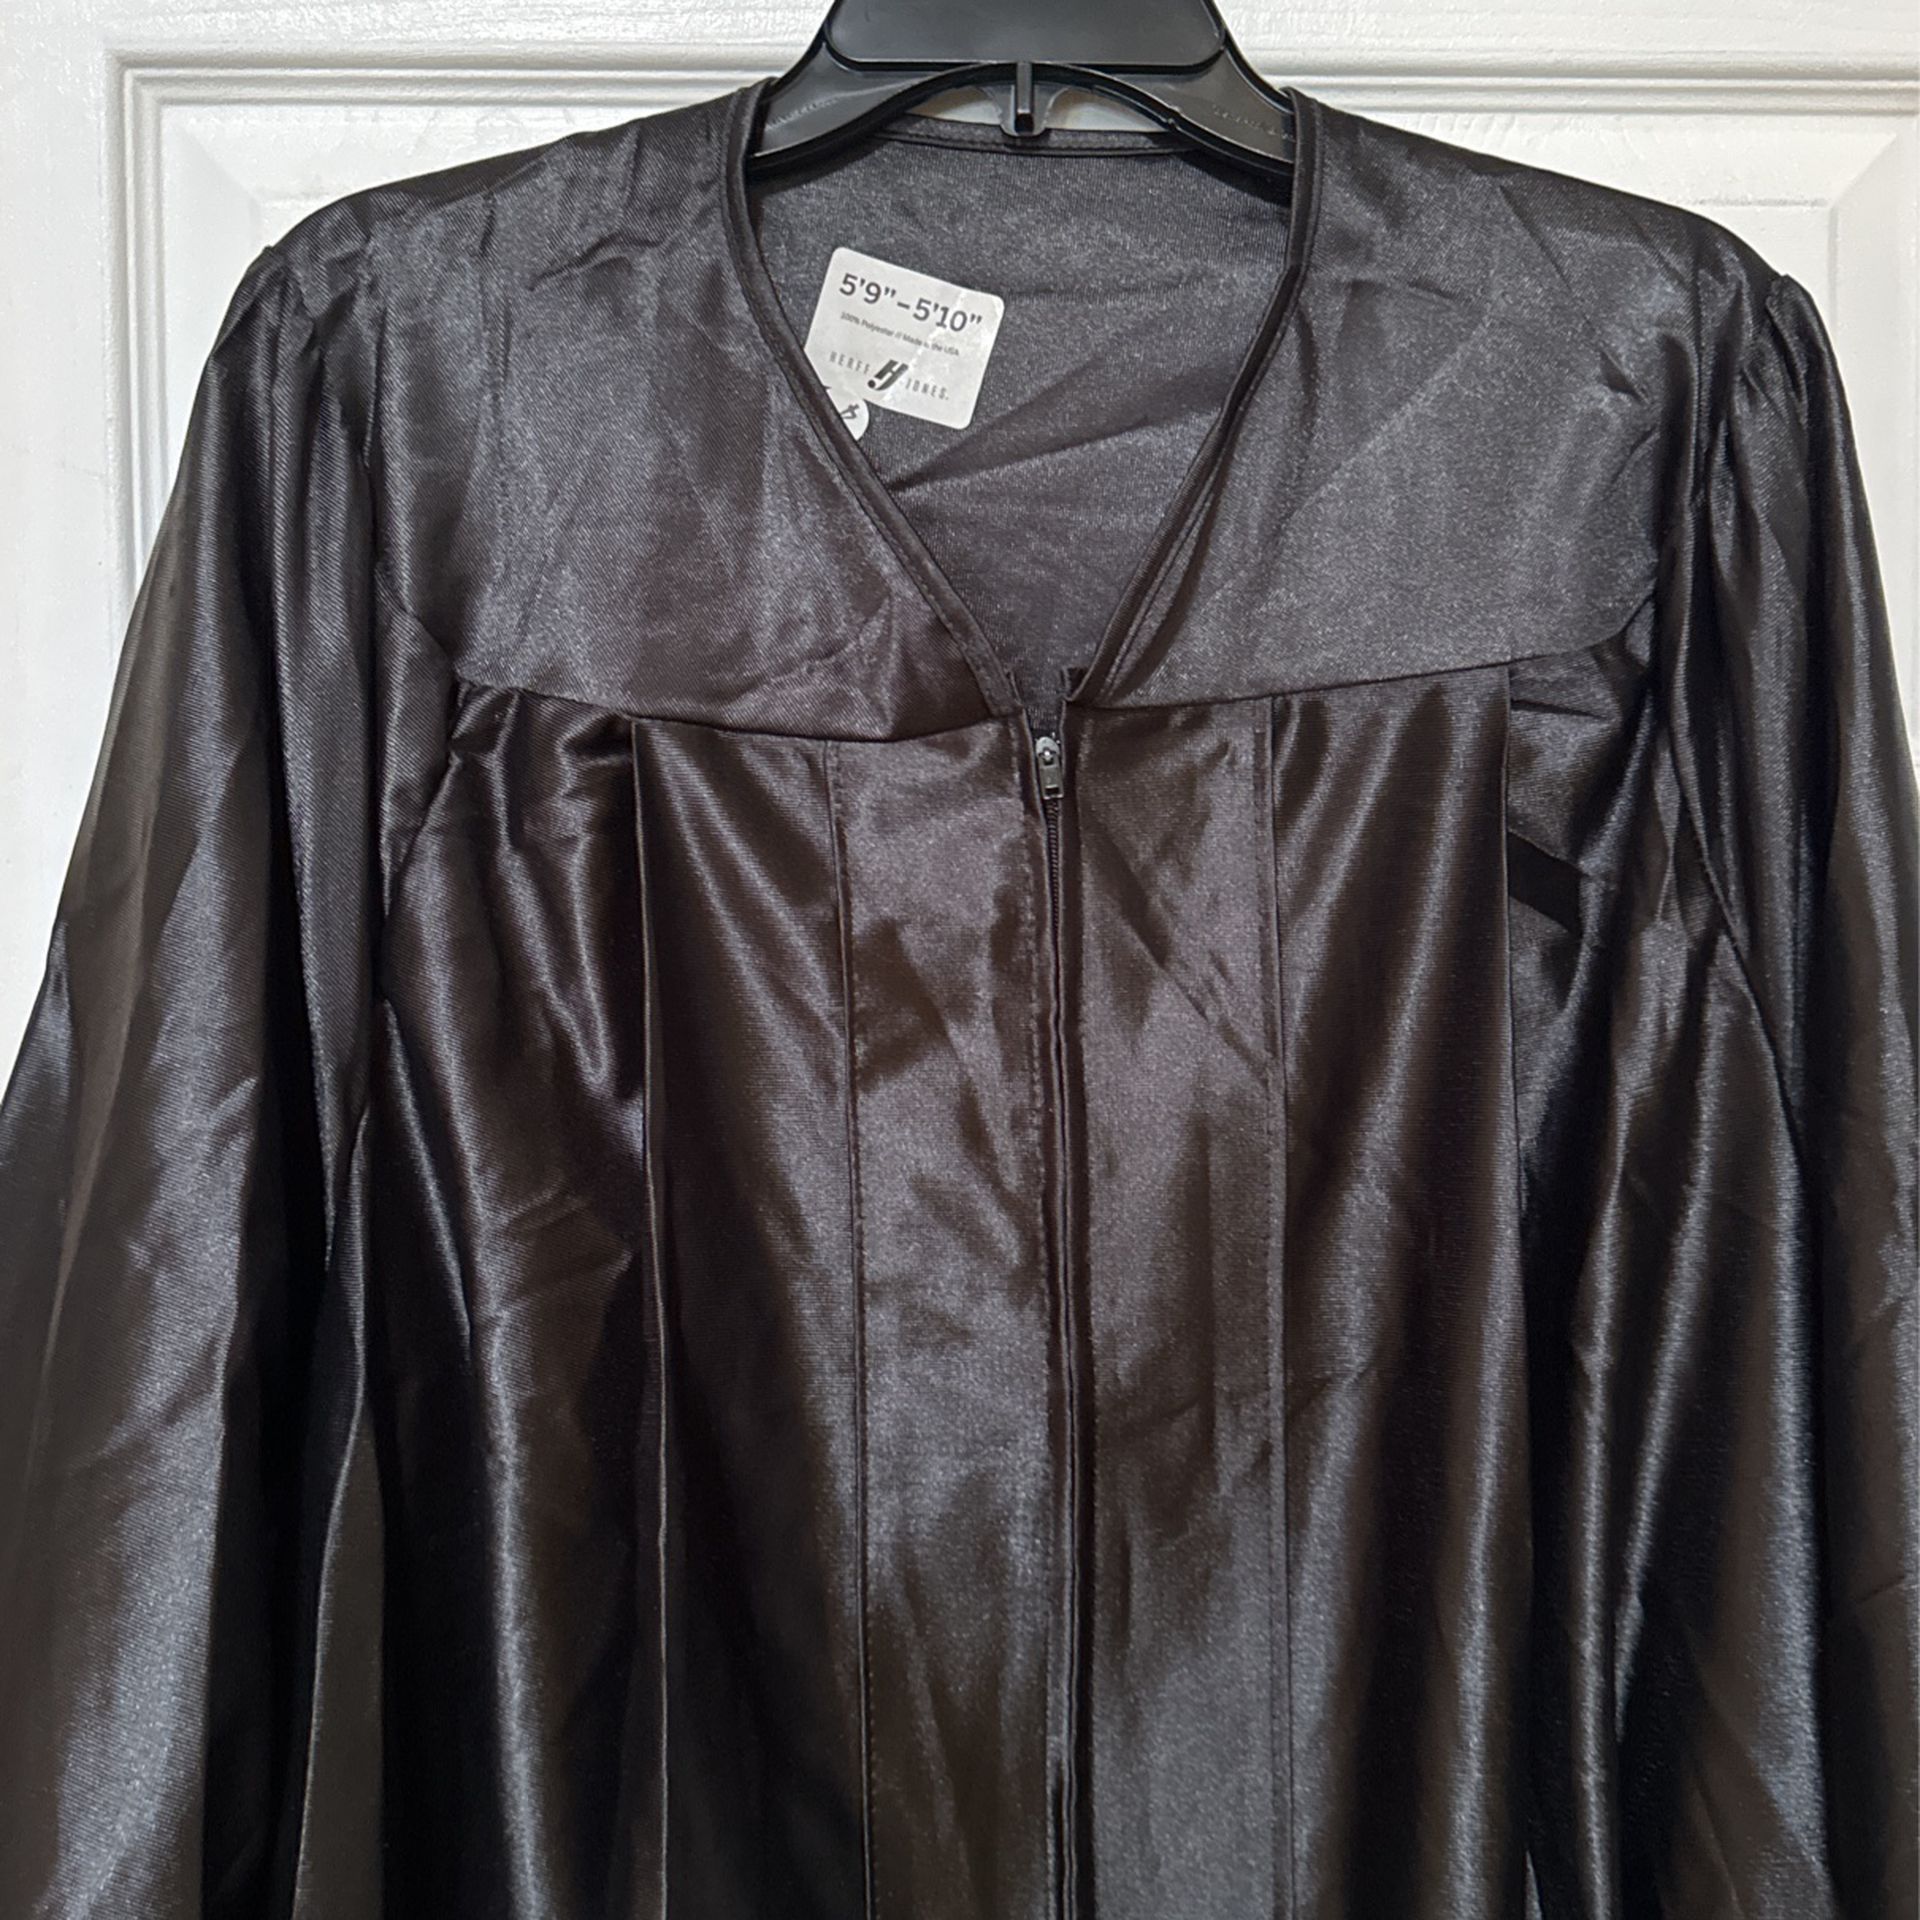 Black Graduation Gown Was From TCH